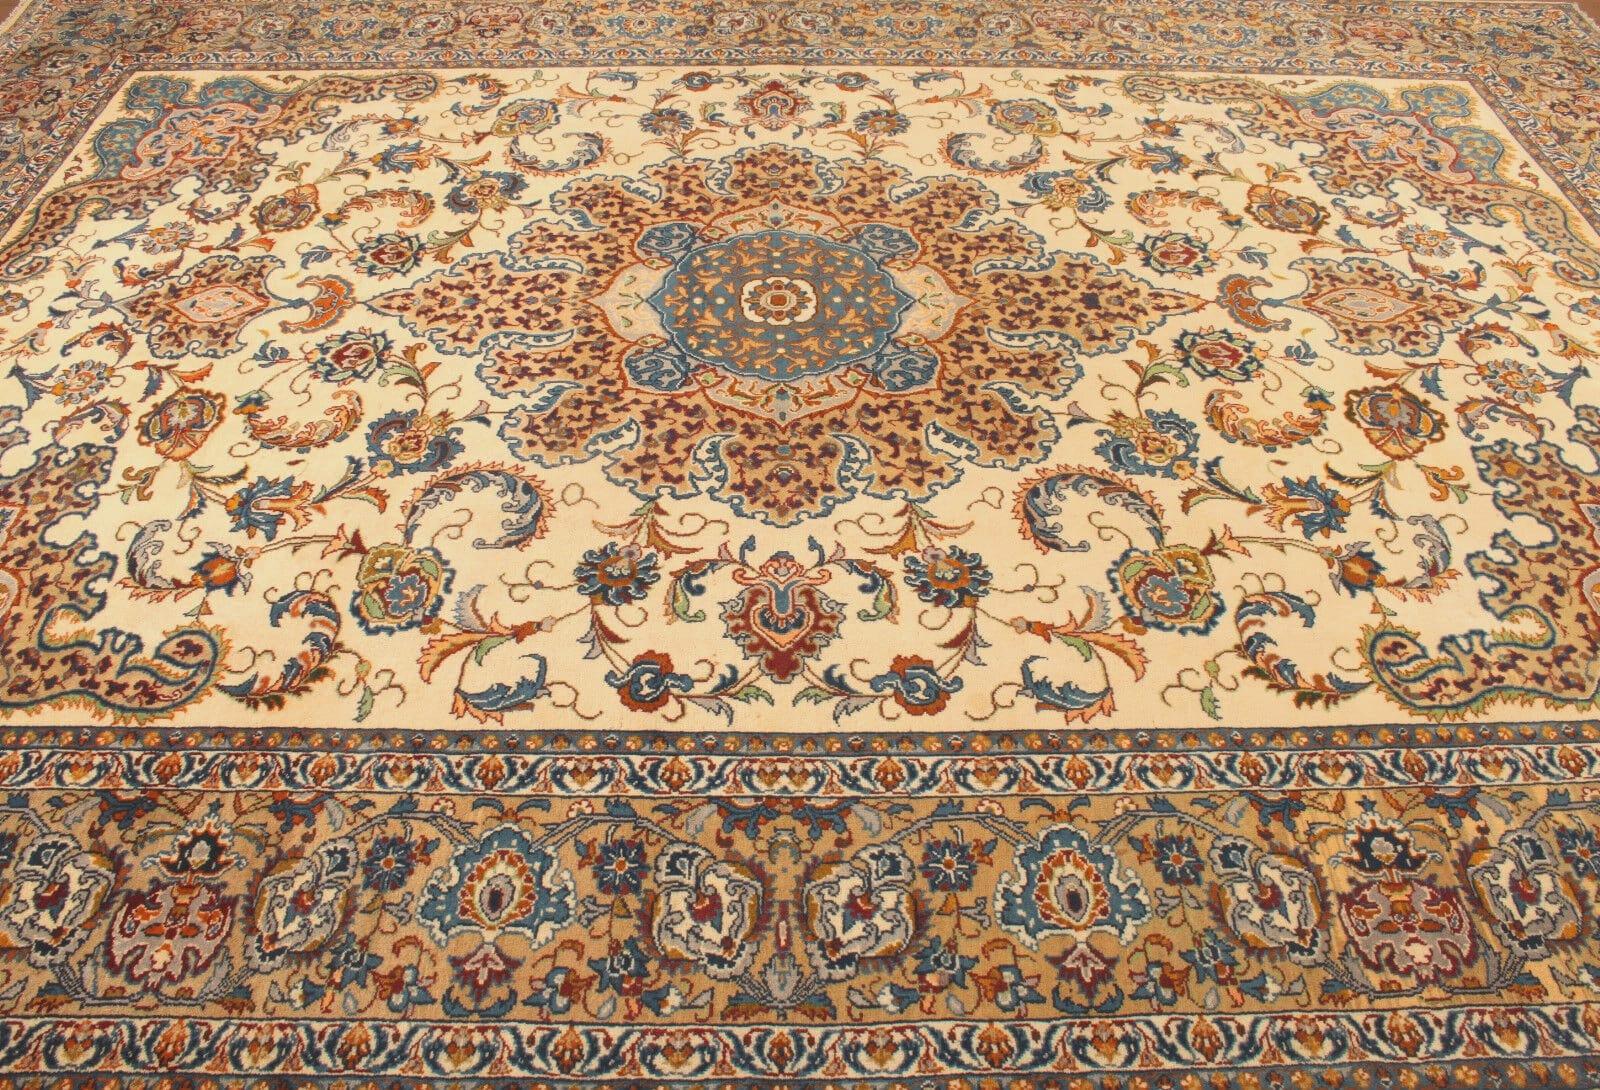 Handmade Vintage Persian Style Isfahan Rug 9.9' x 13.7', 1990s - 1T45 For Sale 1